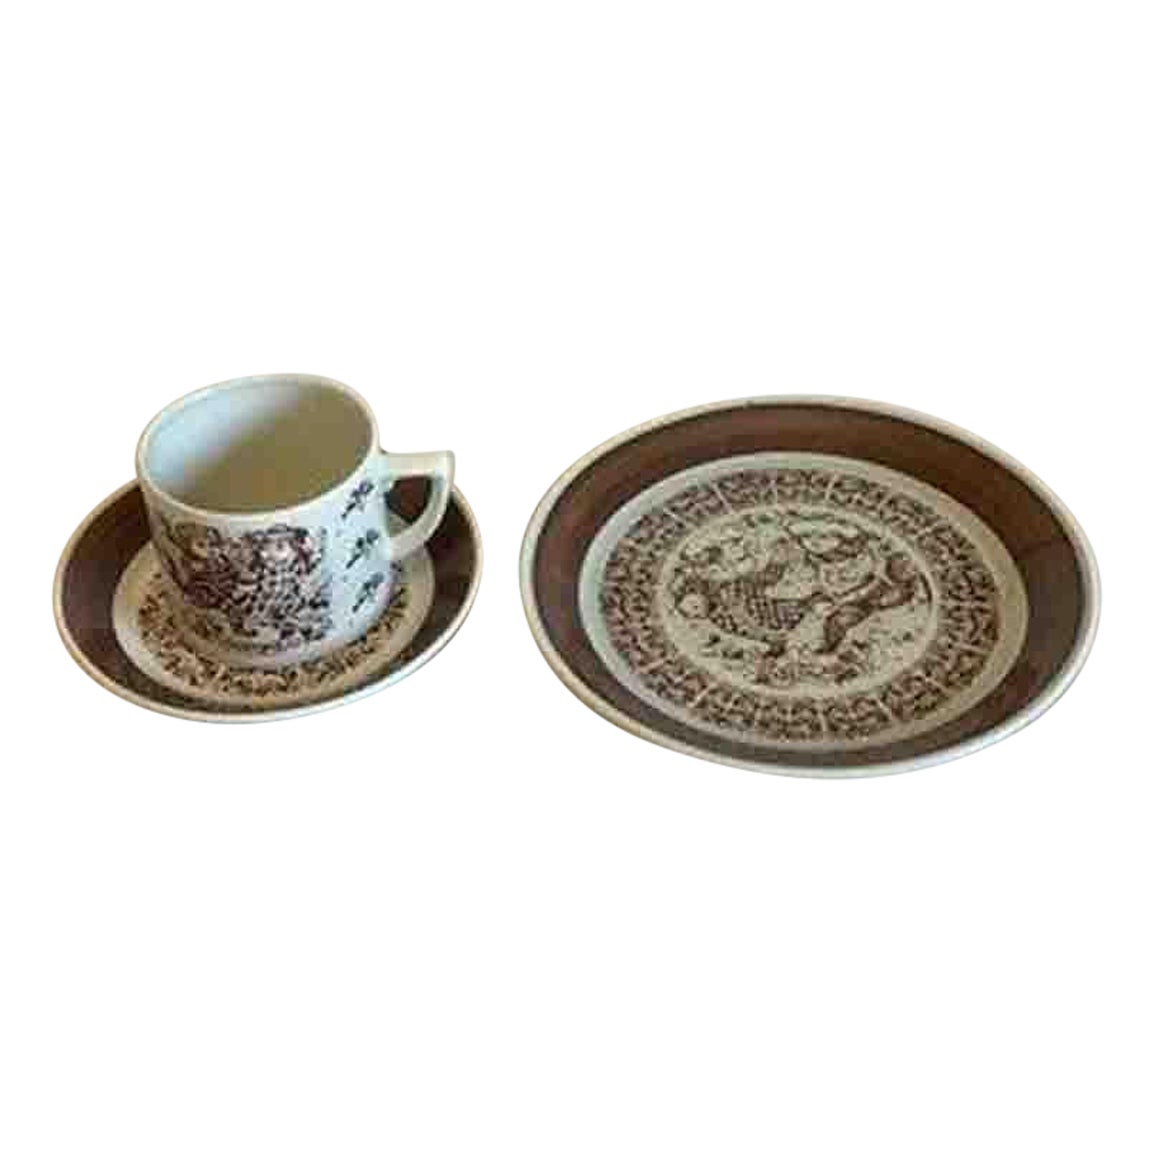 Bjorn Wiinblad, Nymolle January Month Cup No 3513, Saucer and Cake Plate No 3520 For Sale